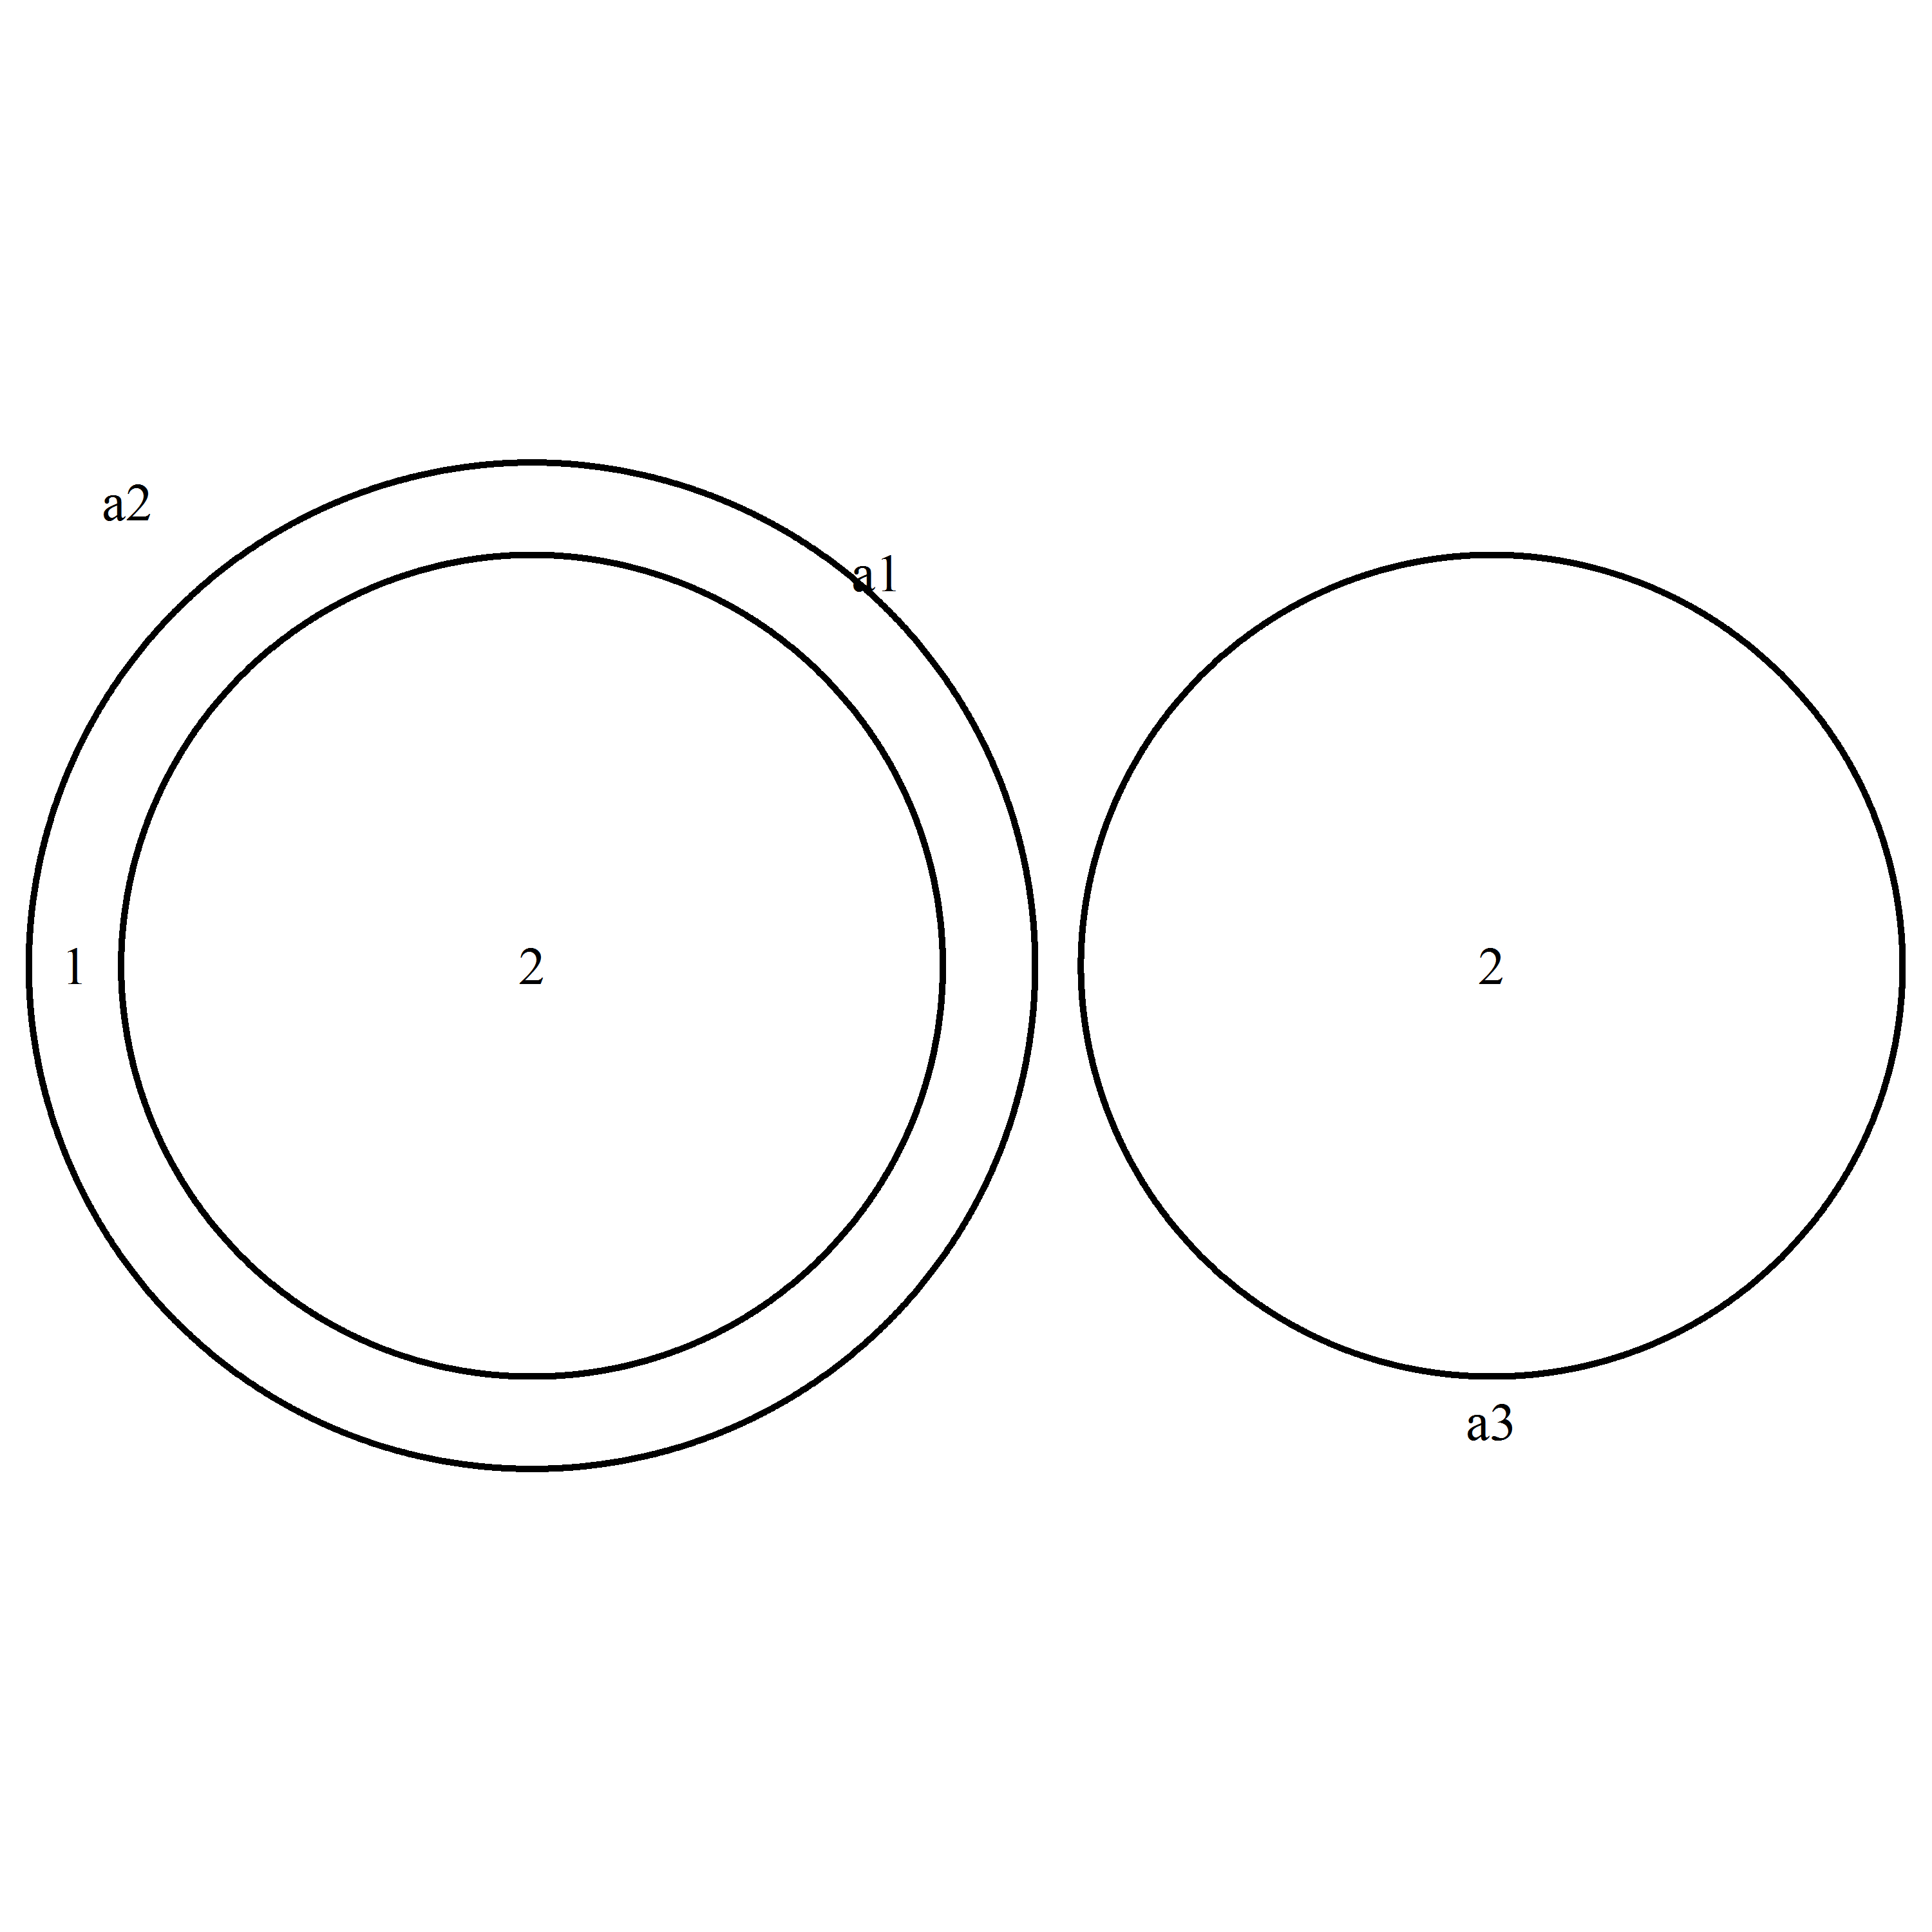 Triple Venn Diagram Why In My Triple Venn Diagram The Circles With No Overlap Isolated